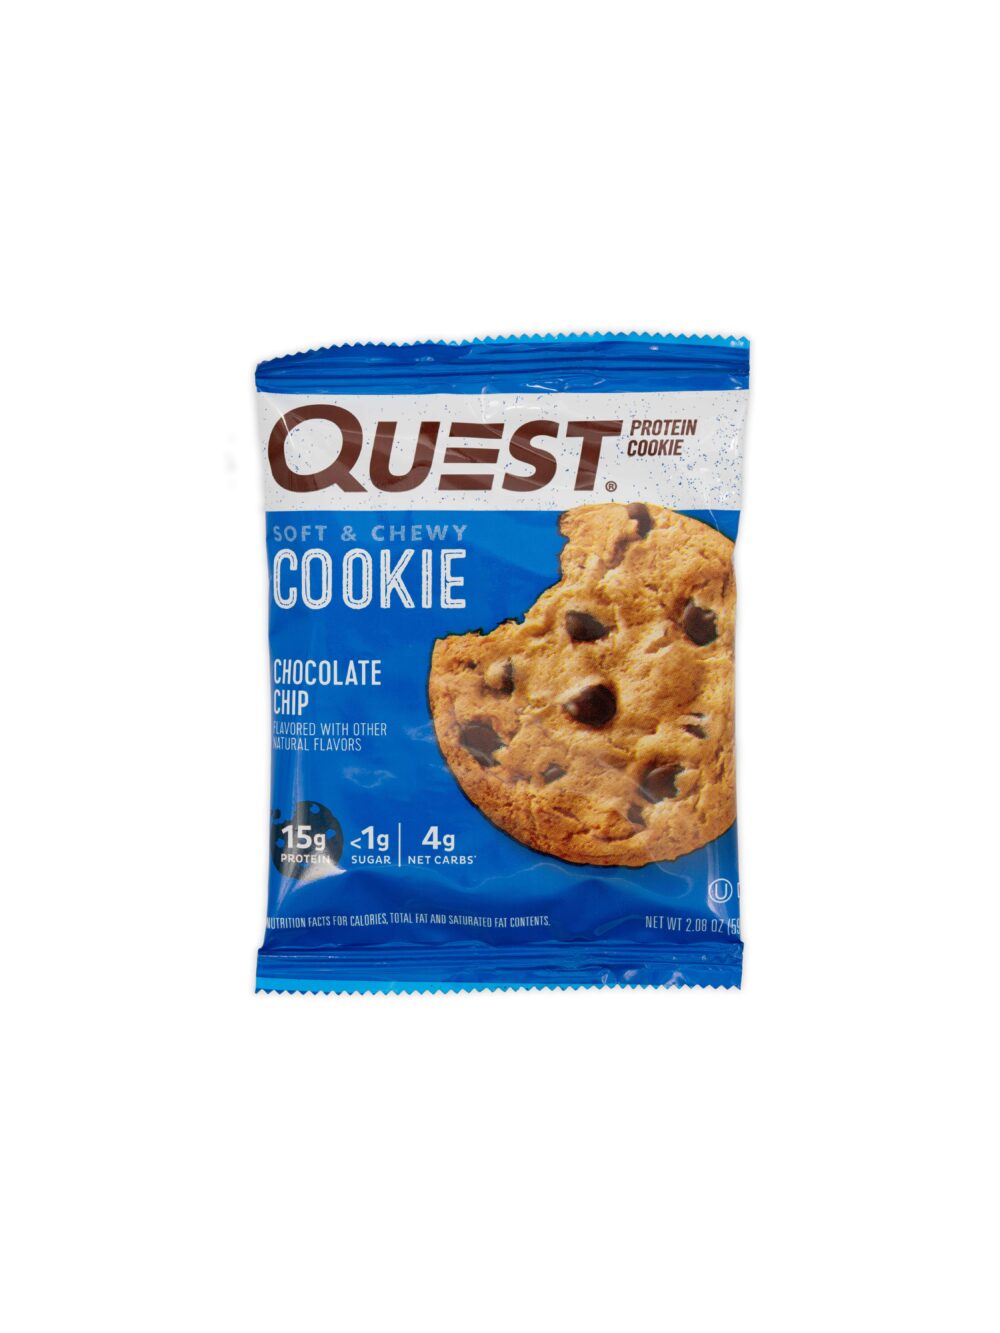 888849005994 Quest Chocolate chip FRONT min scaled